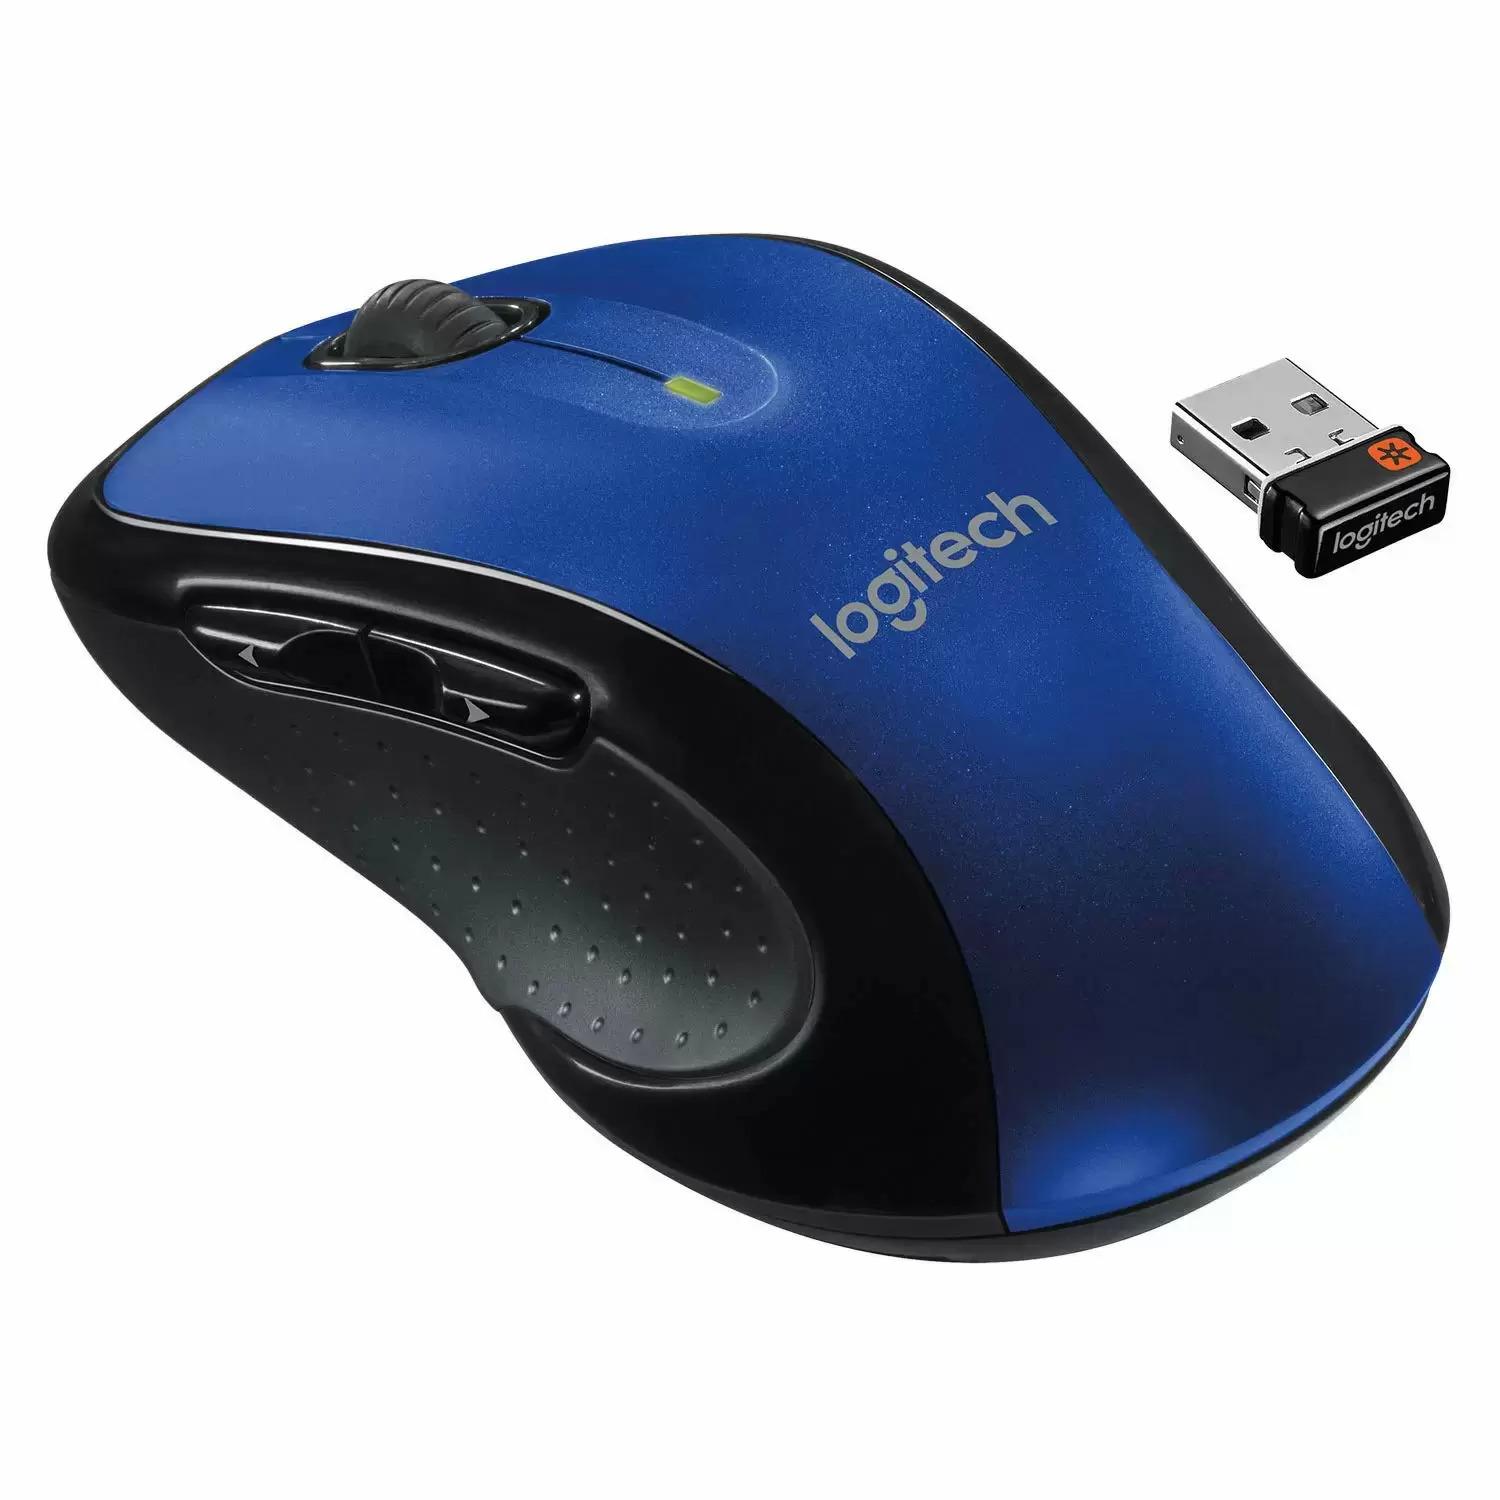 Logitech M510 Wireless Laser Mouse for $11.99